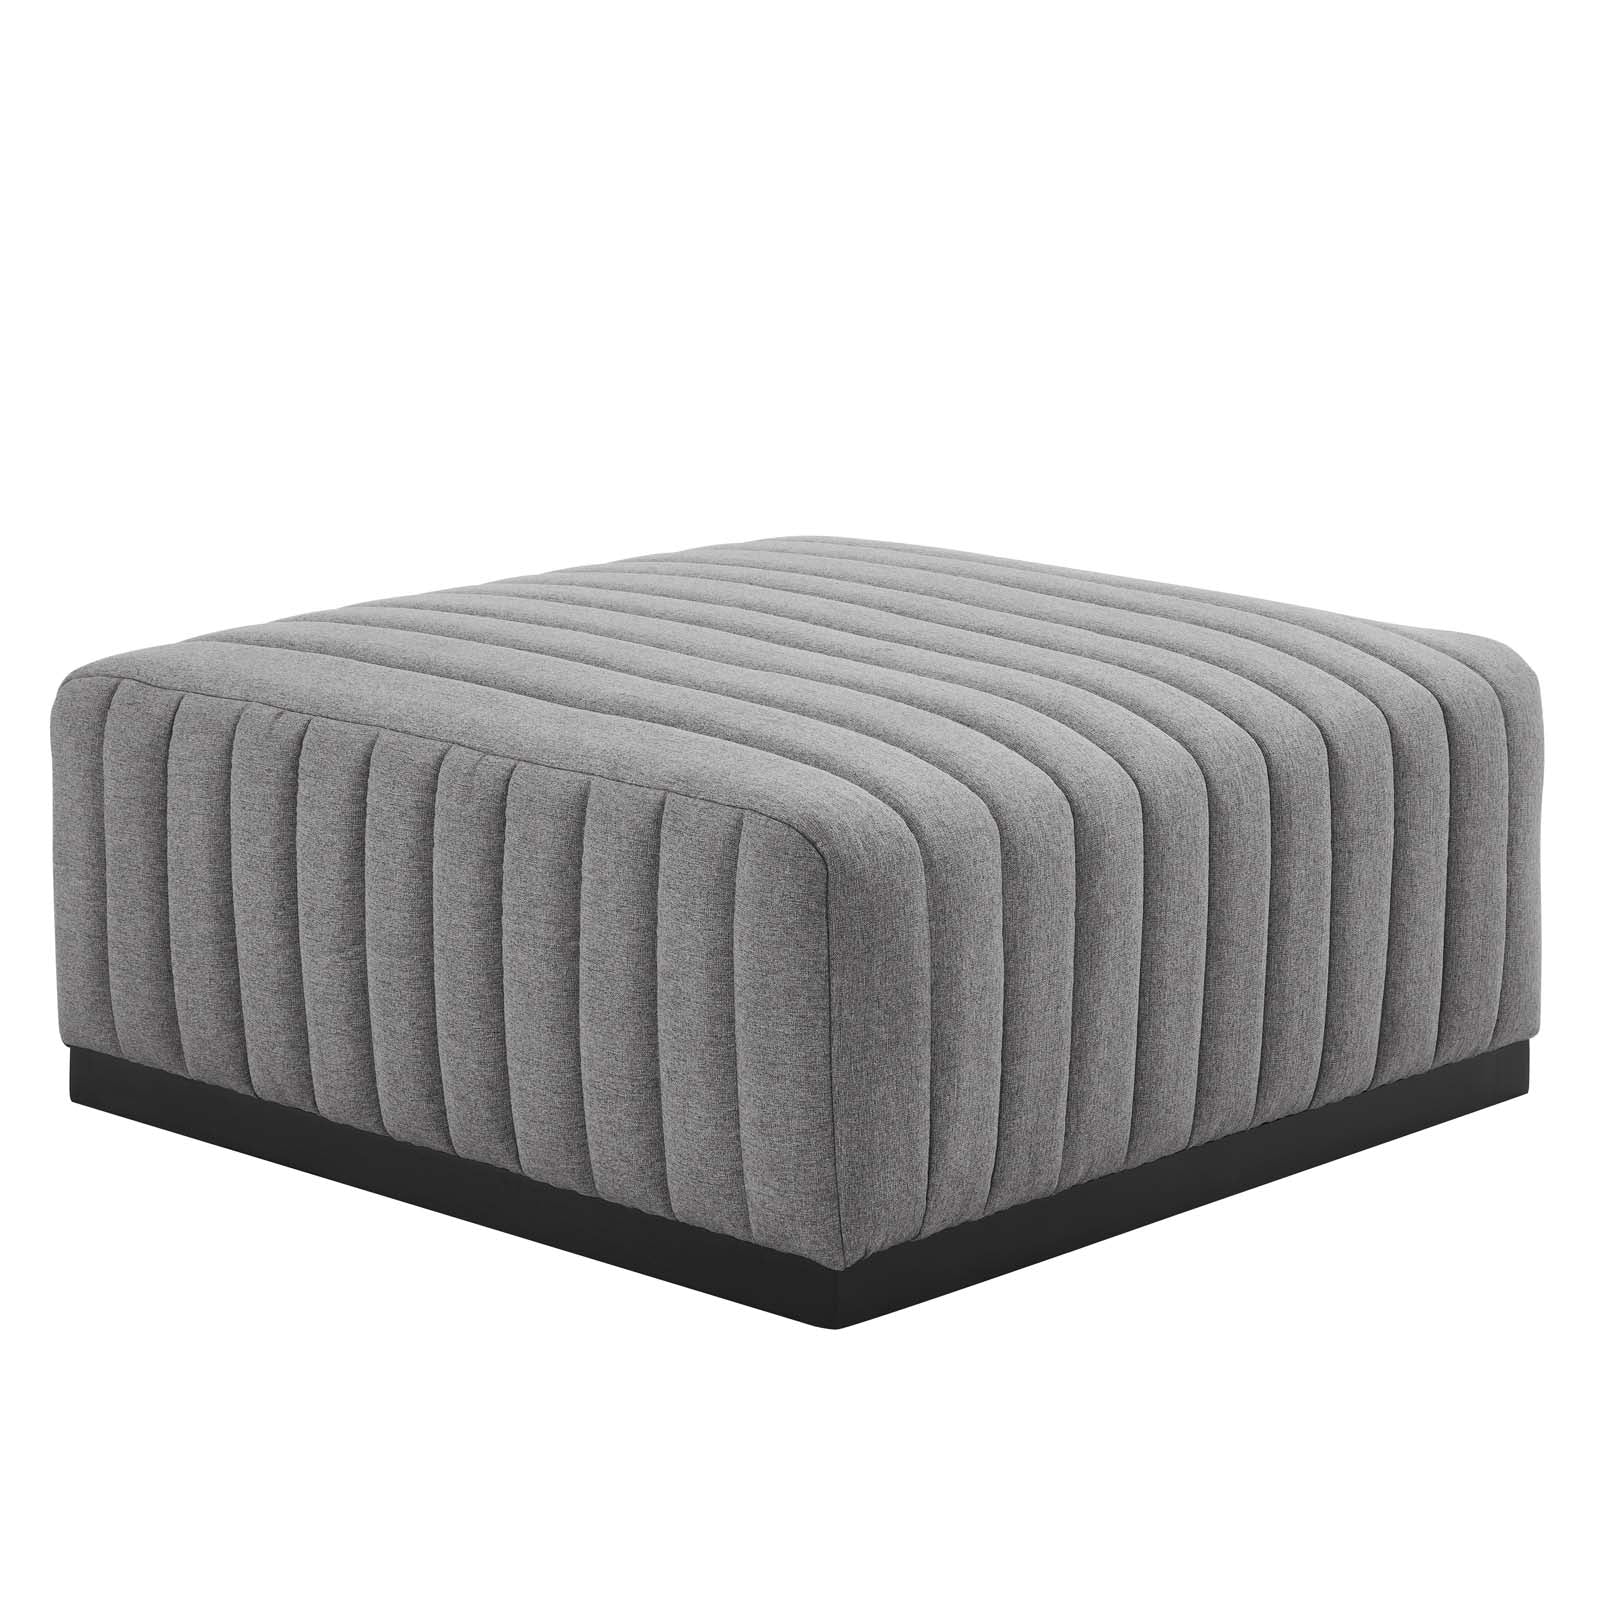 Modway Sectional Sofas - Conjure Channel Tufted Upholstered Fabric 6-Piece Sectional Sofa Black Light Gray